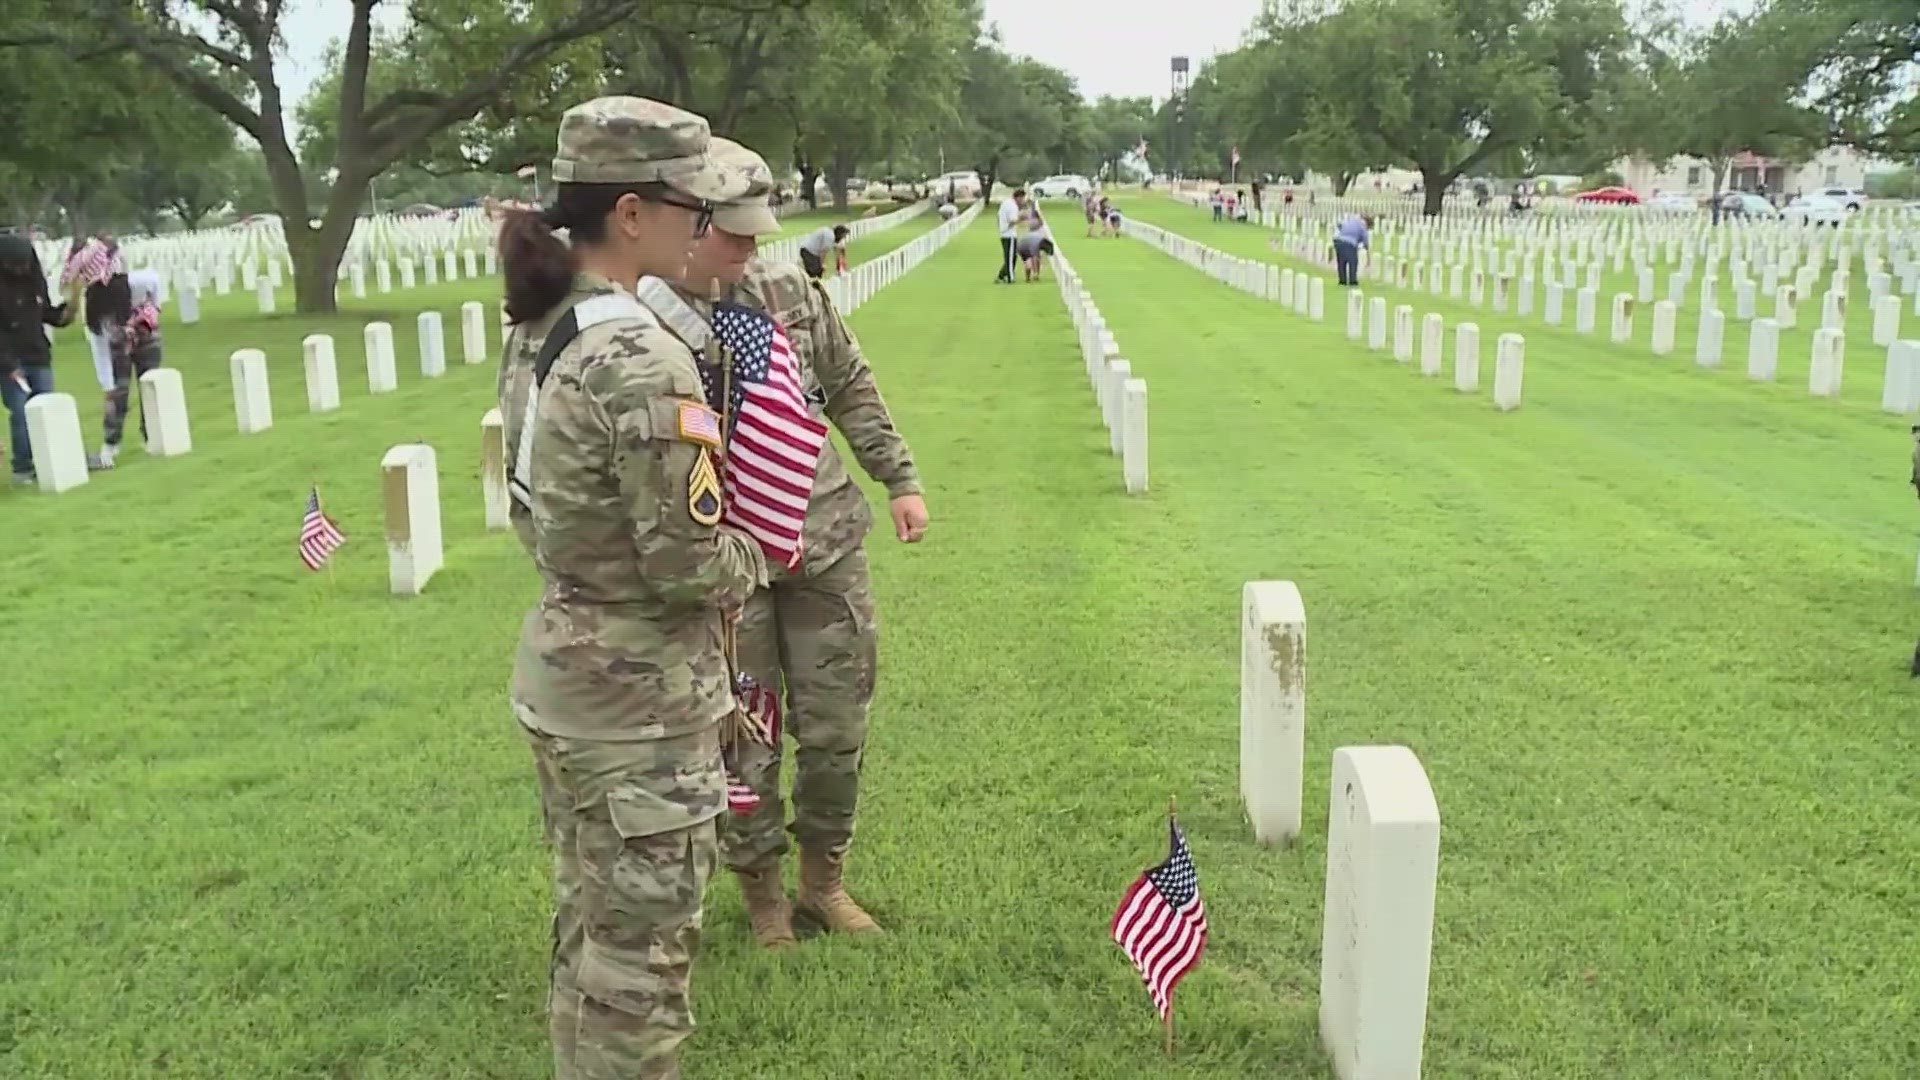 Hundreds of flags were placed at the cemetery in honor of Memorial Day.